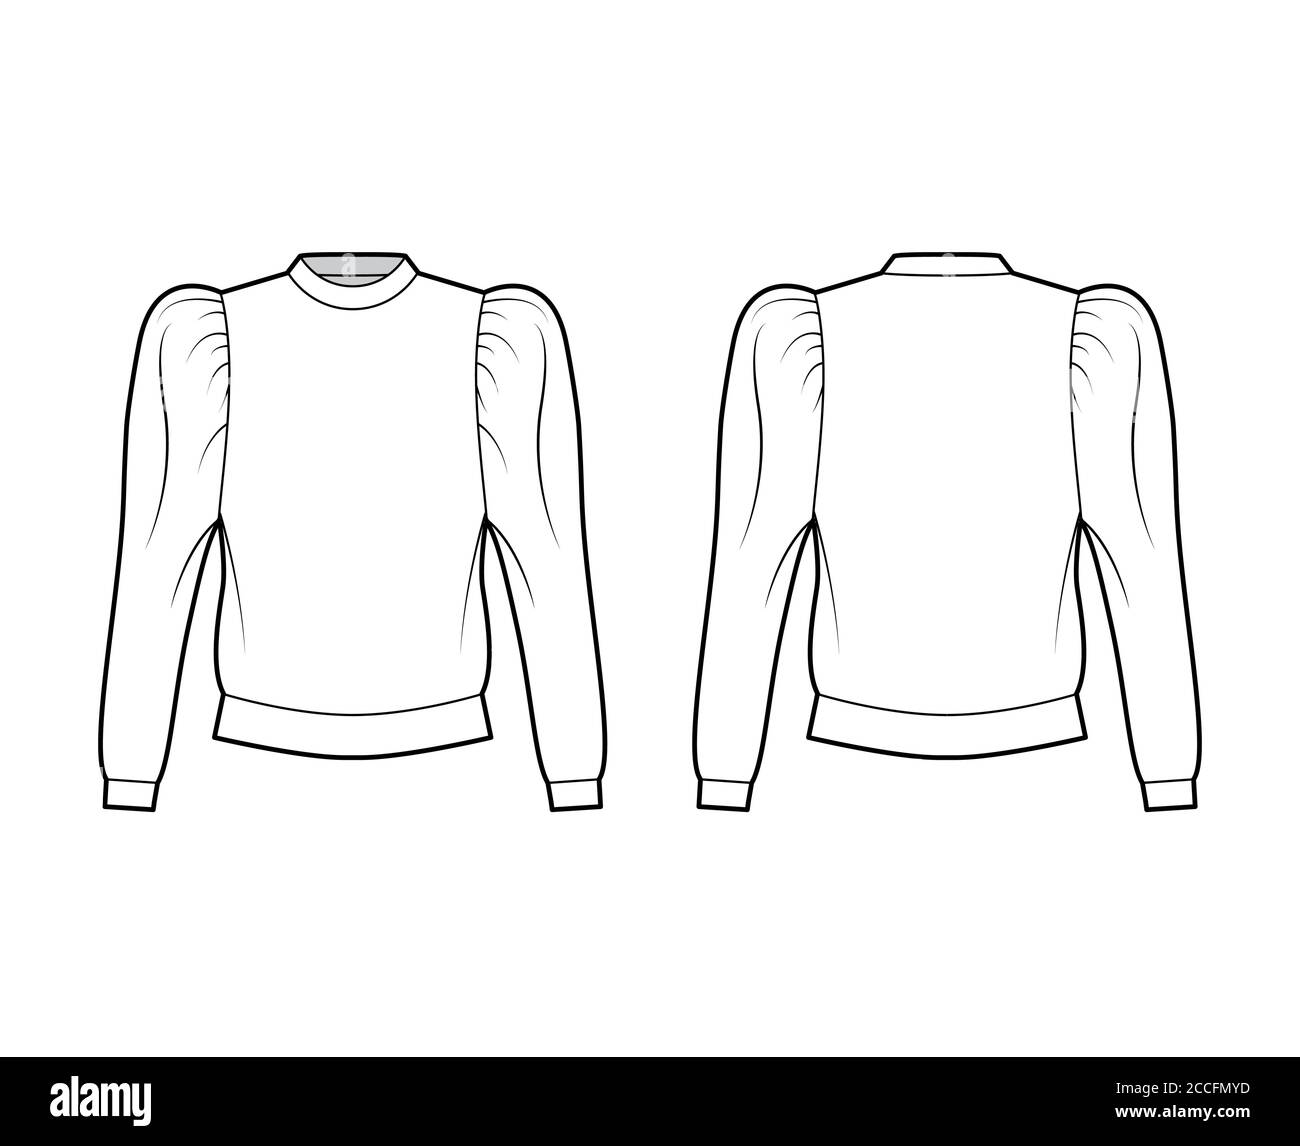 Cotton-jersey sweatshirt technical fashion illustration with relaxed fit, crew neckline, gathered, puffy long sleeves. Flat jumper apparel template front, back white color. Women, men, unisex top CAD Stock Vector